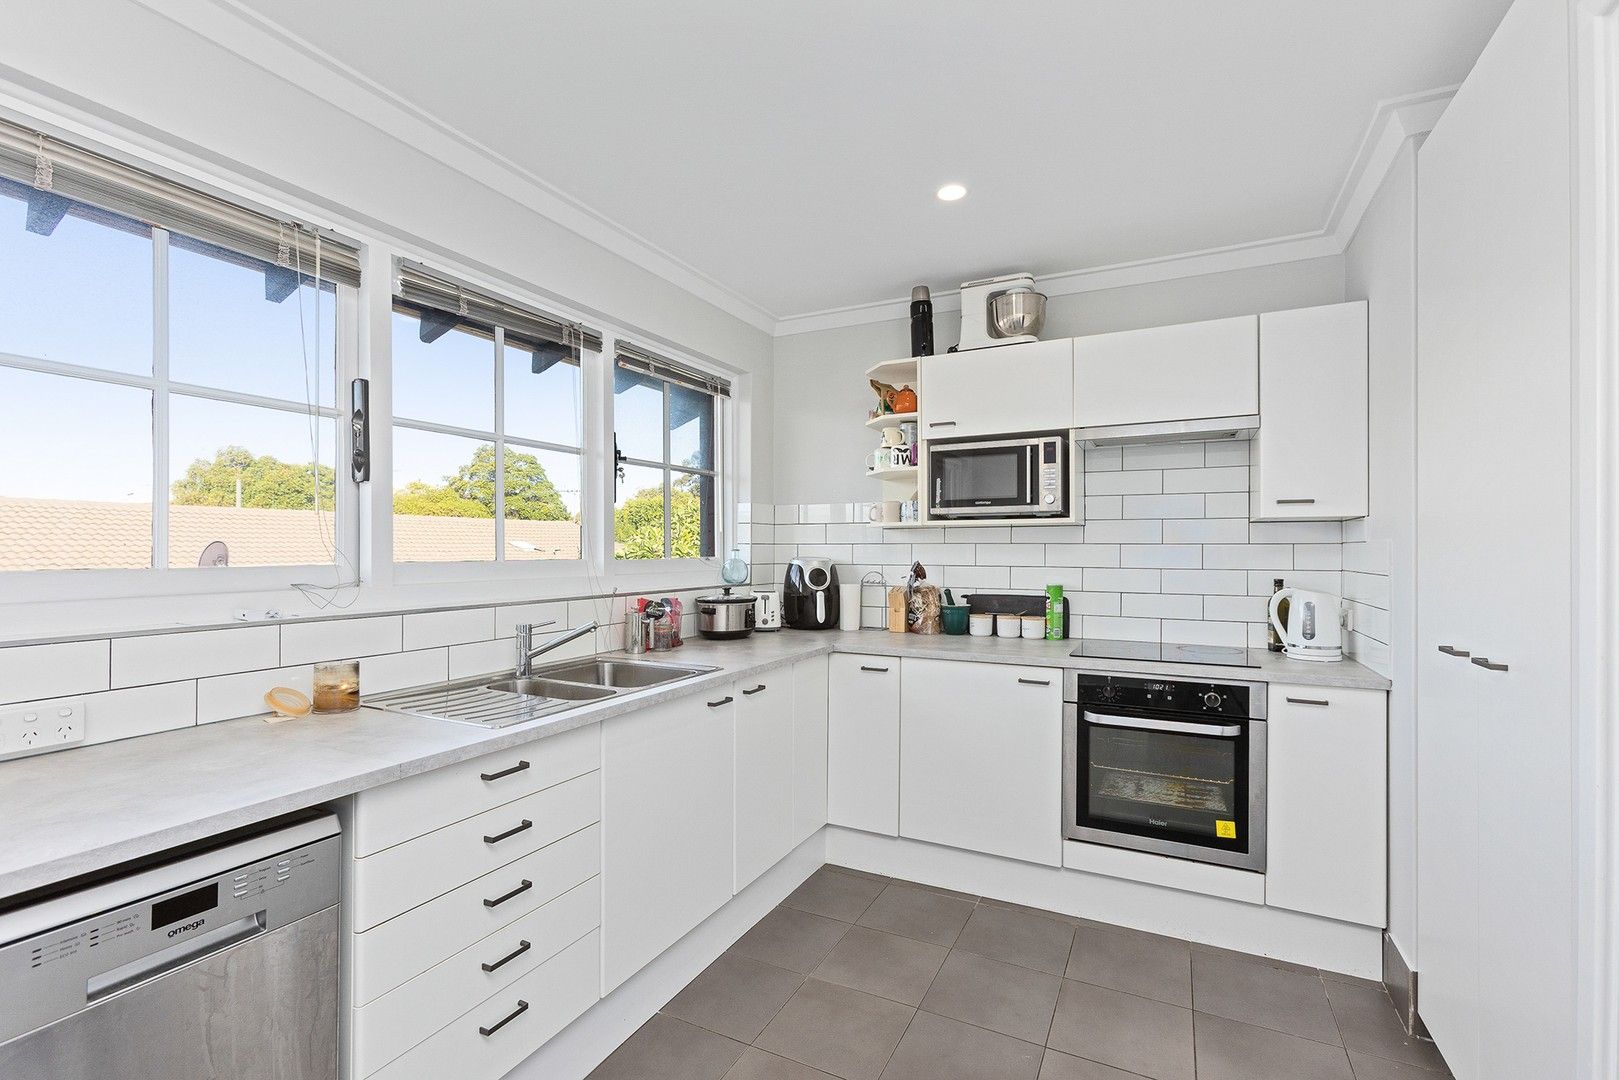 2 bedrooms Apartment / Unit / Flat in 10/59 Waddell Road BICTON WA, 6157